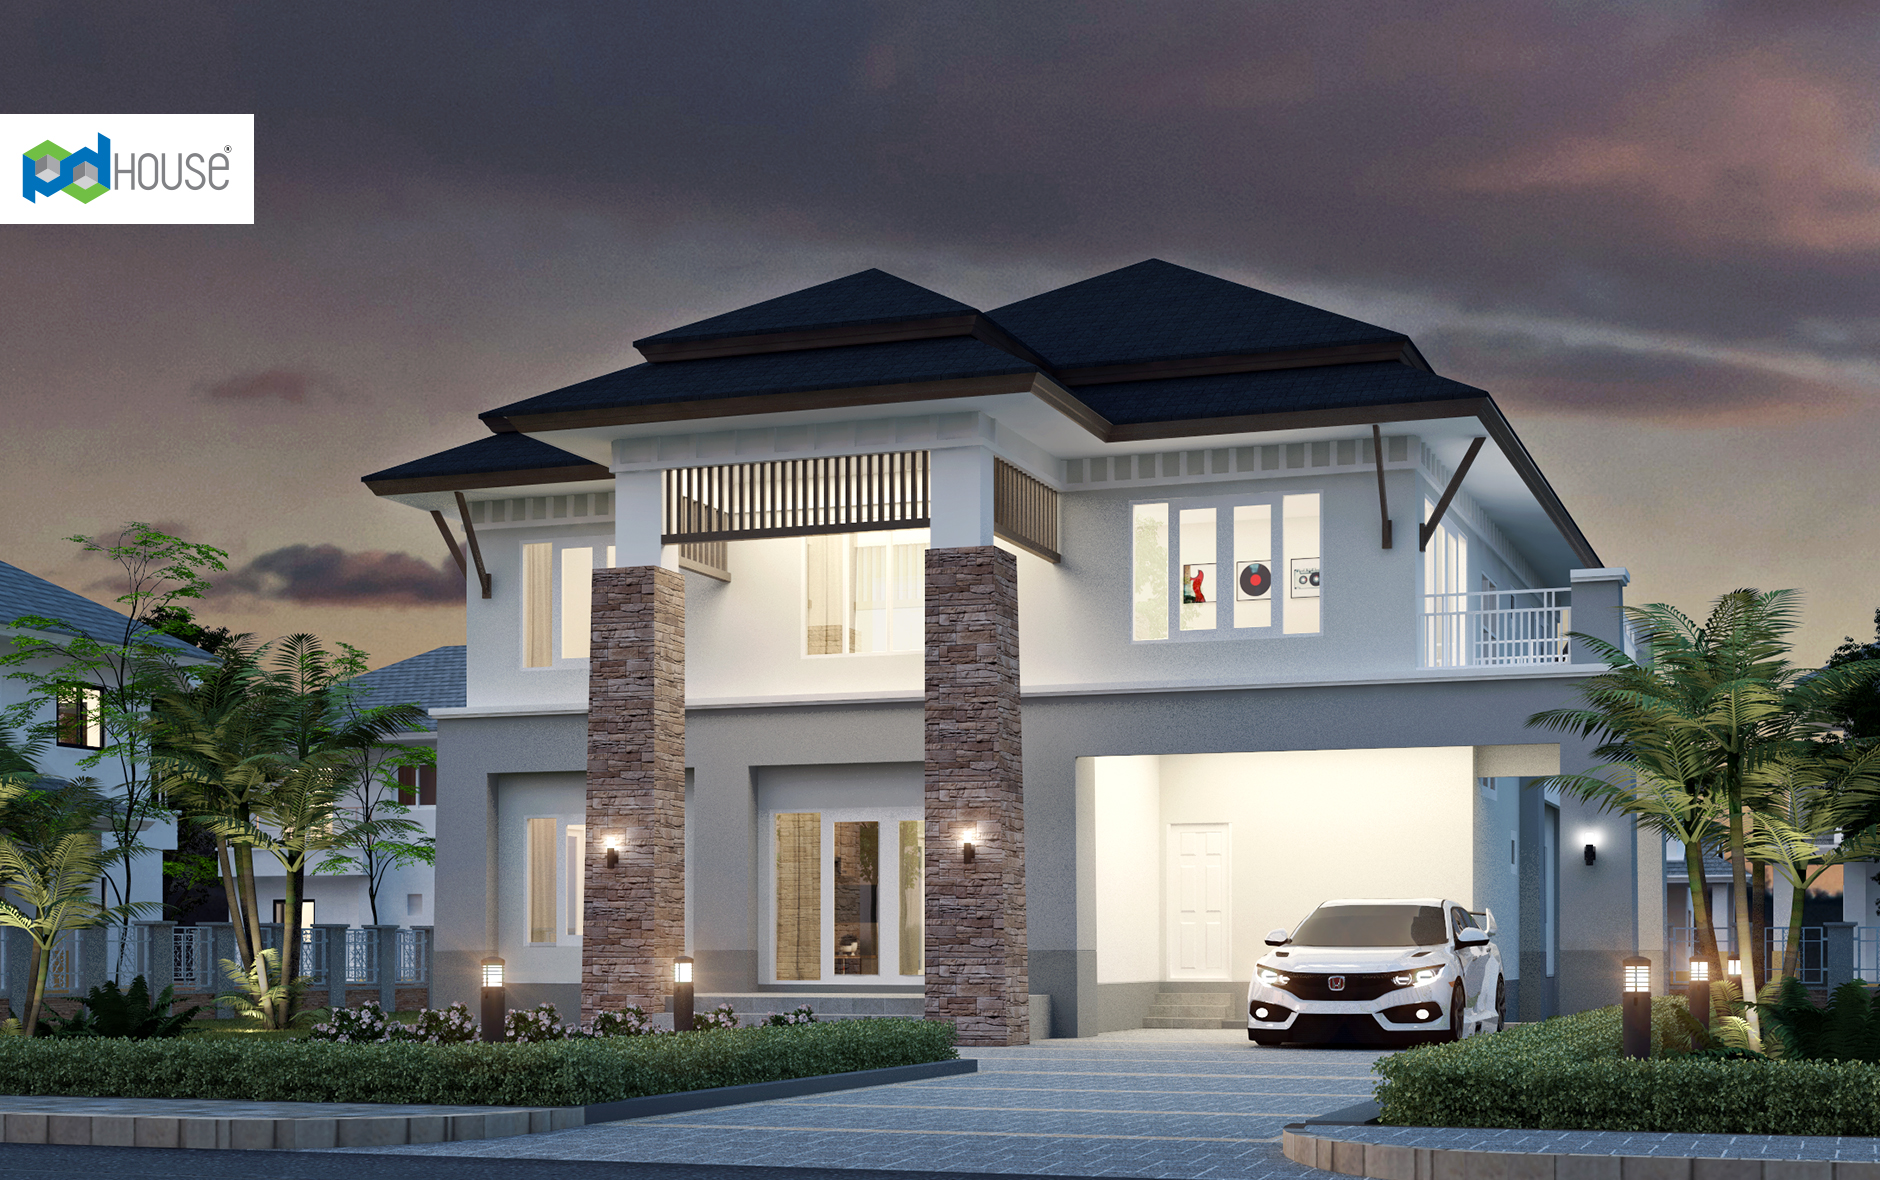 4 Bedroom House Plans 18x22 Meter 59x72, How Many Bathrooms For A 4 Bedroom House